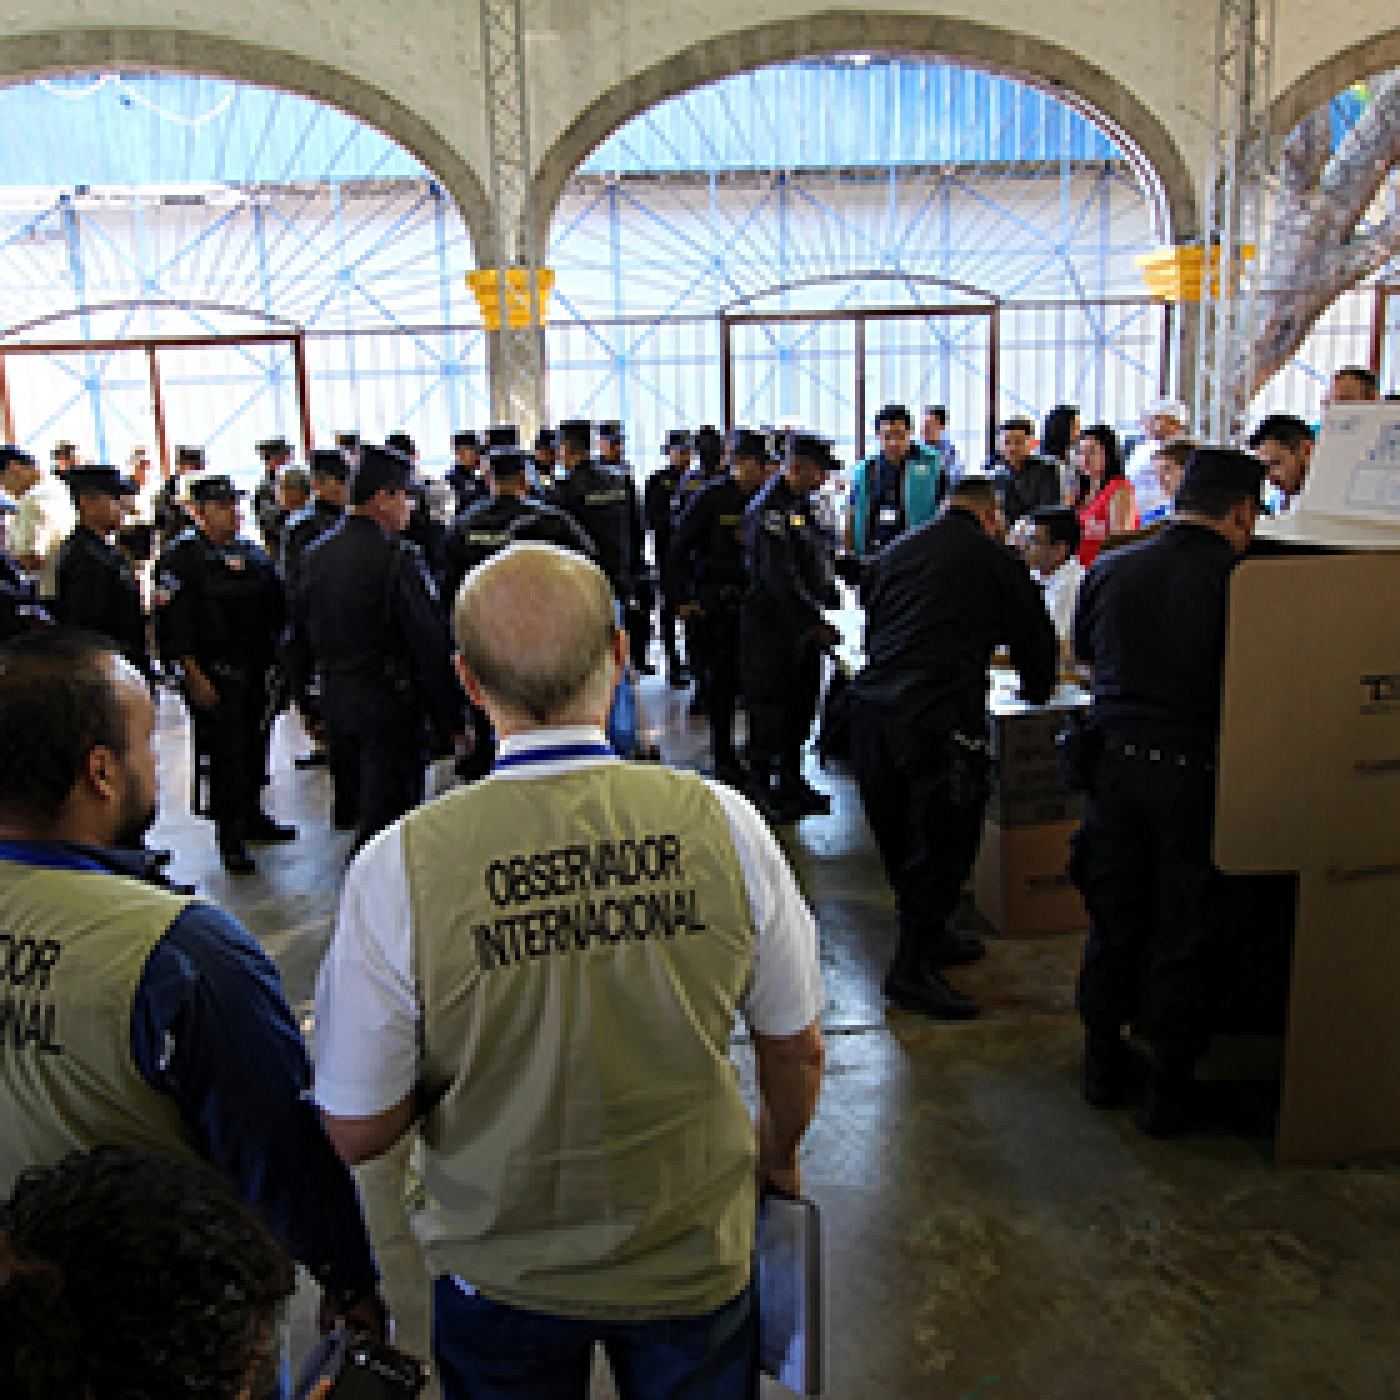 International observers watch police officers vote in a polling station.